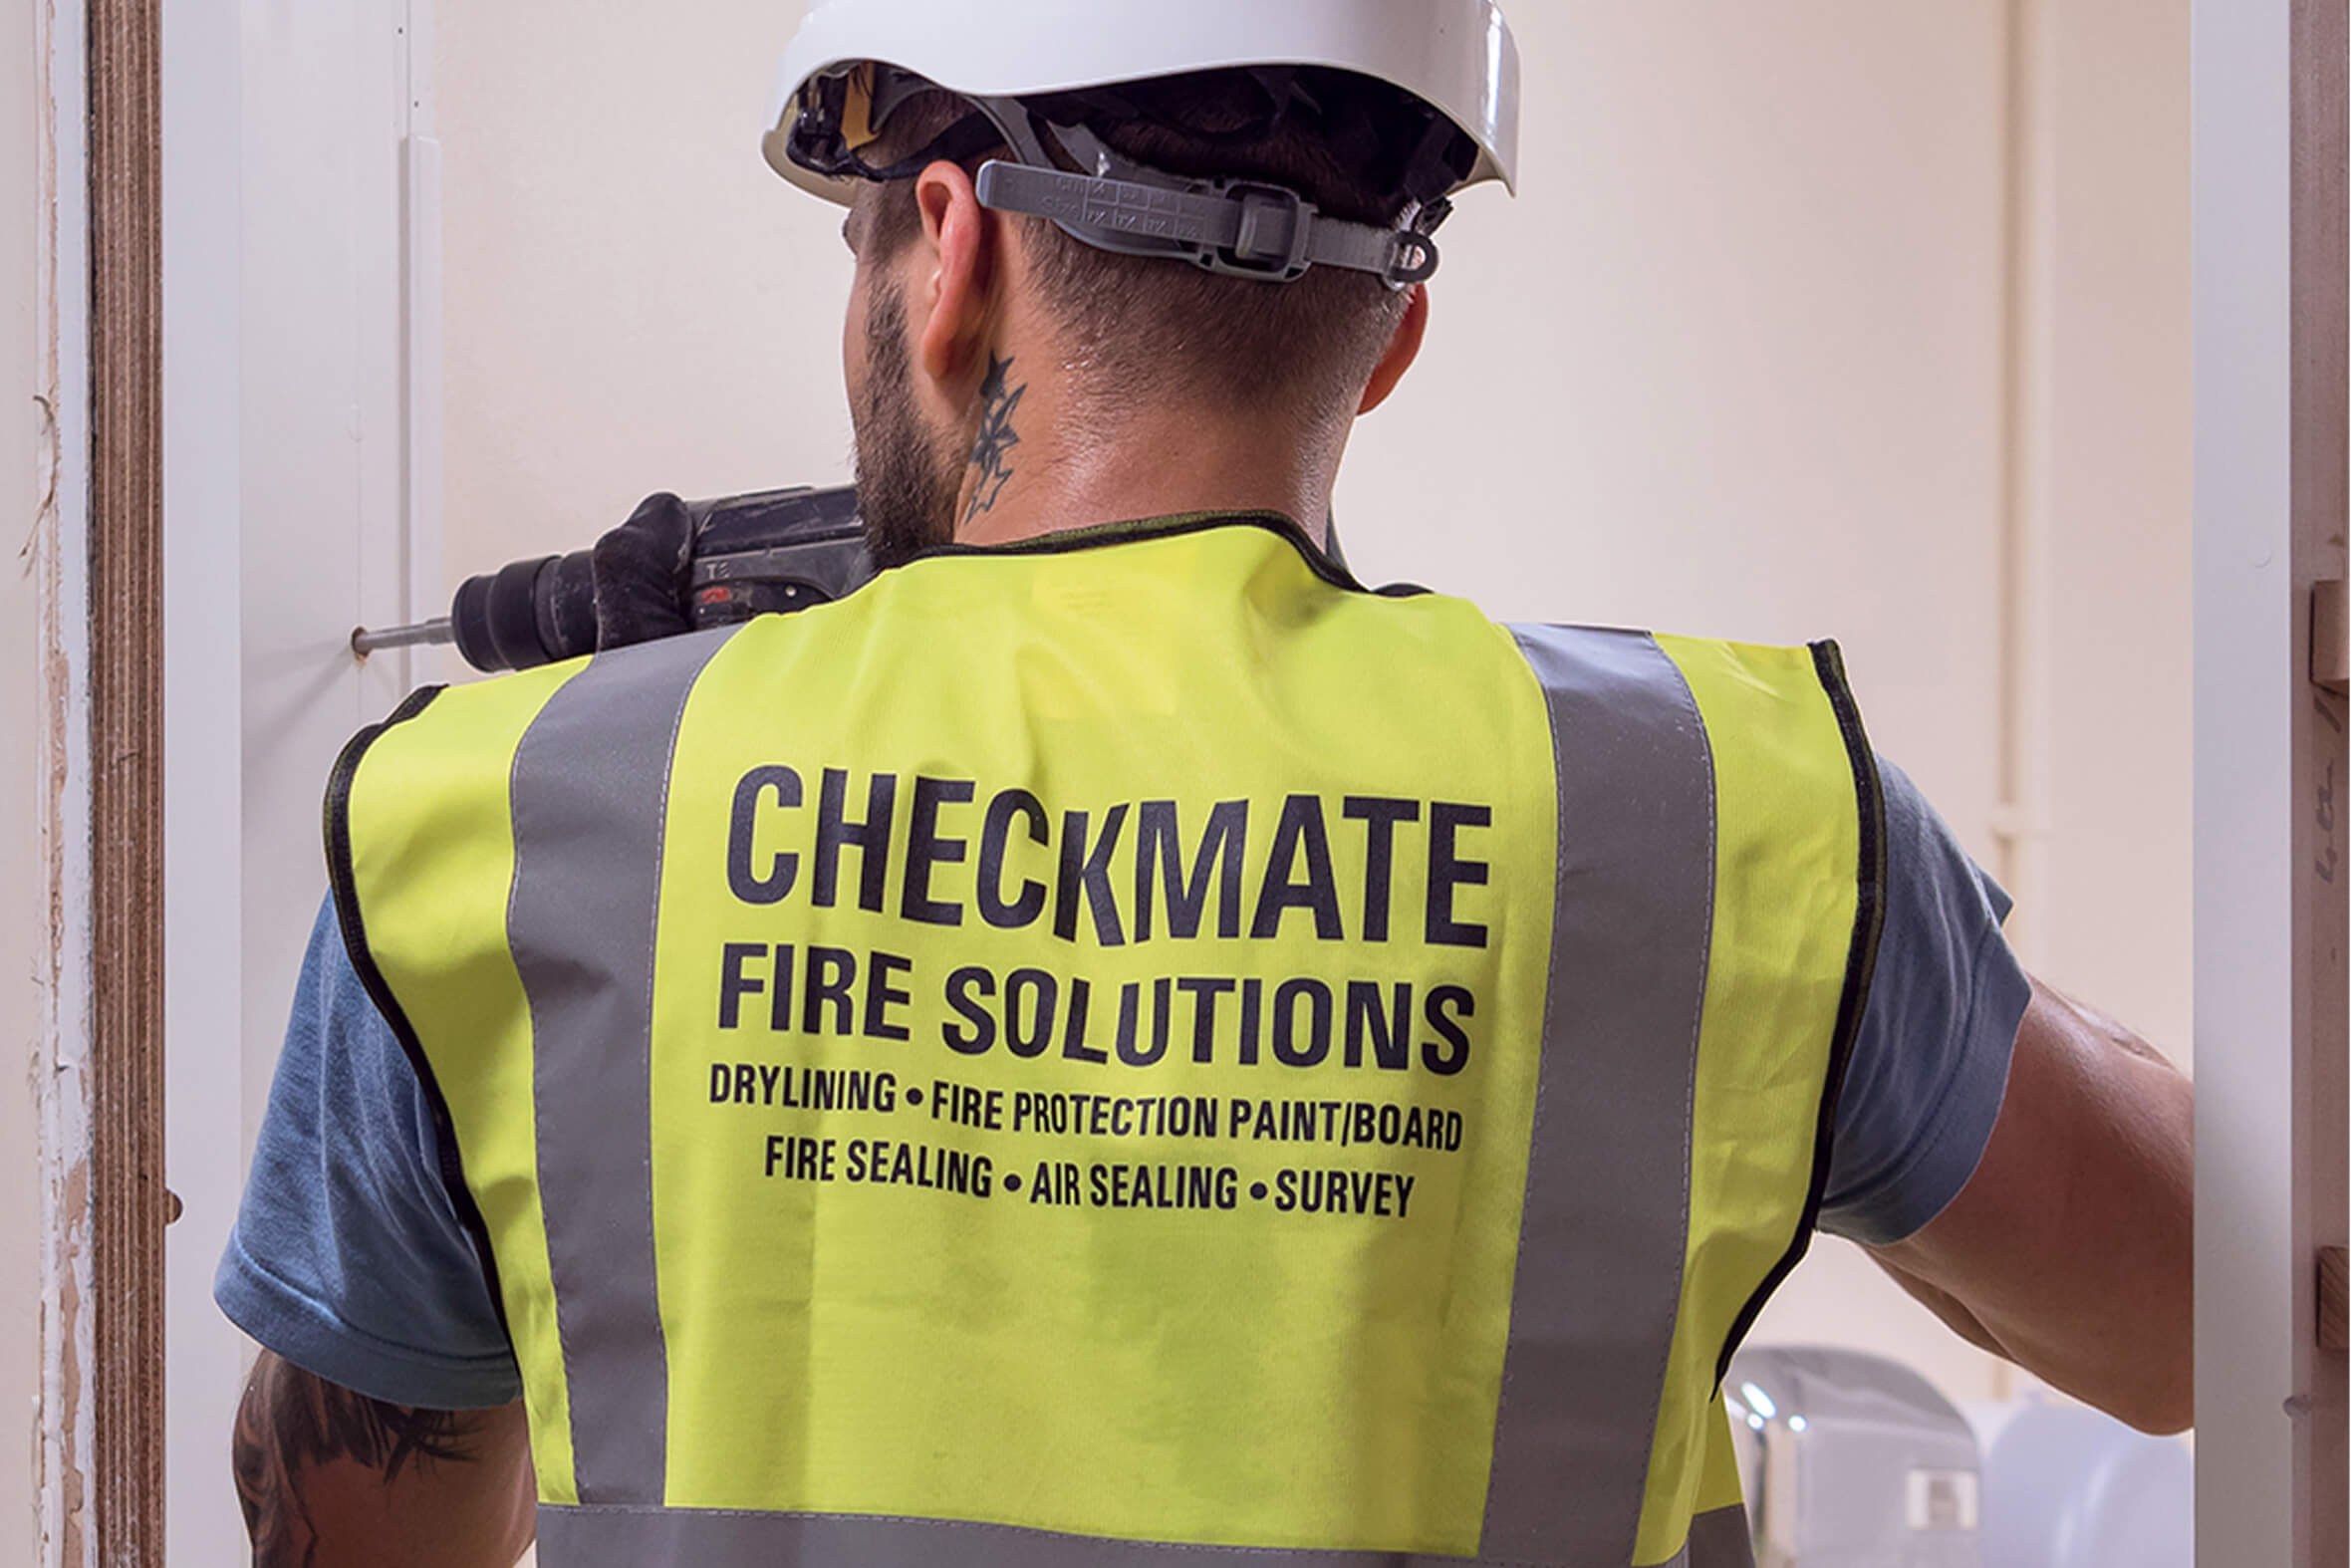 Checkmate engineer remediating a fire door